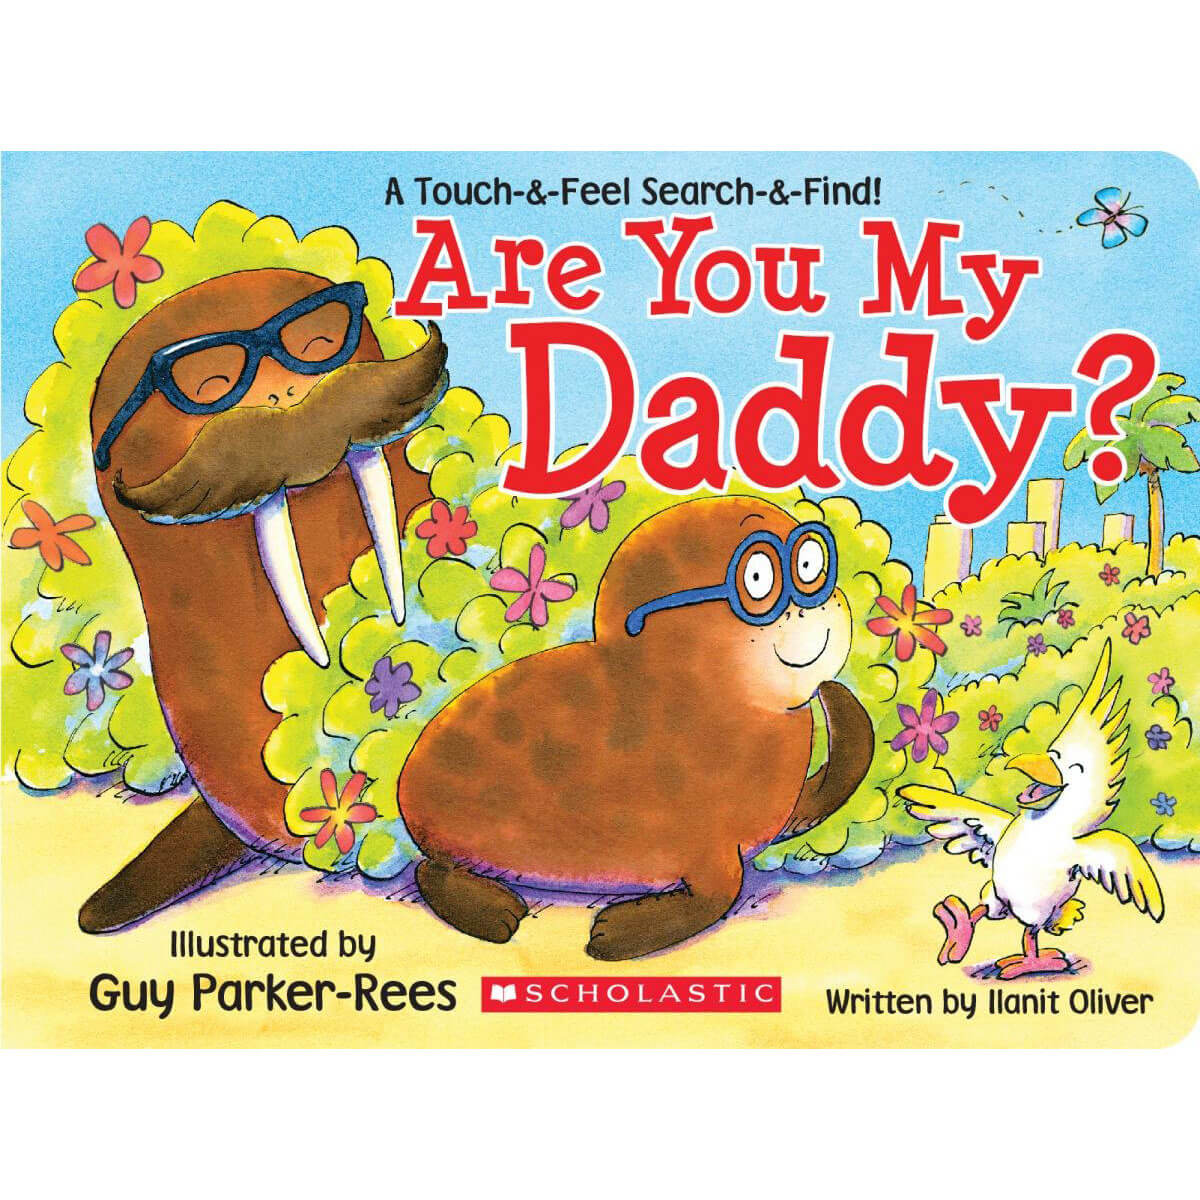 Are You My Daddy?